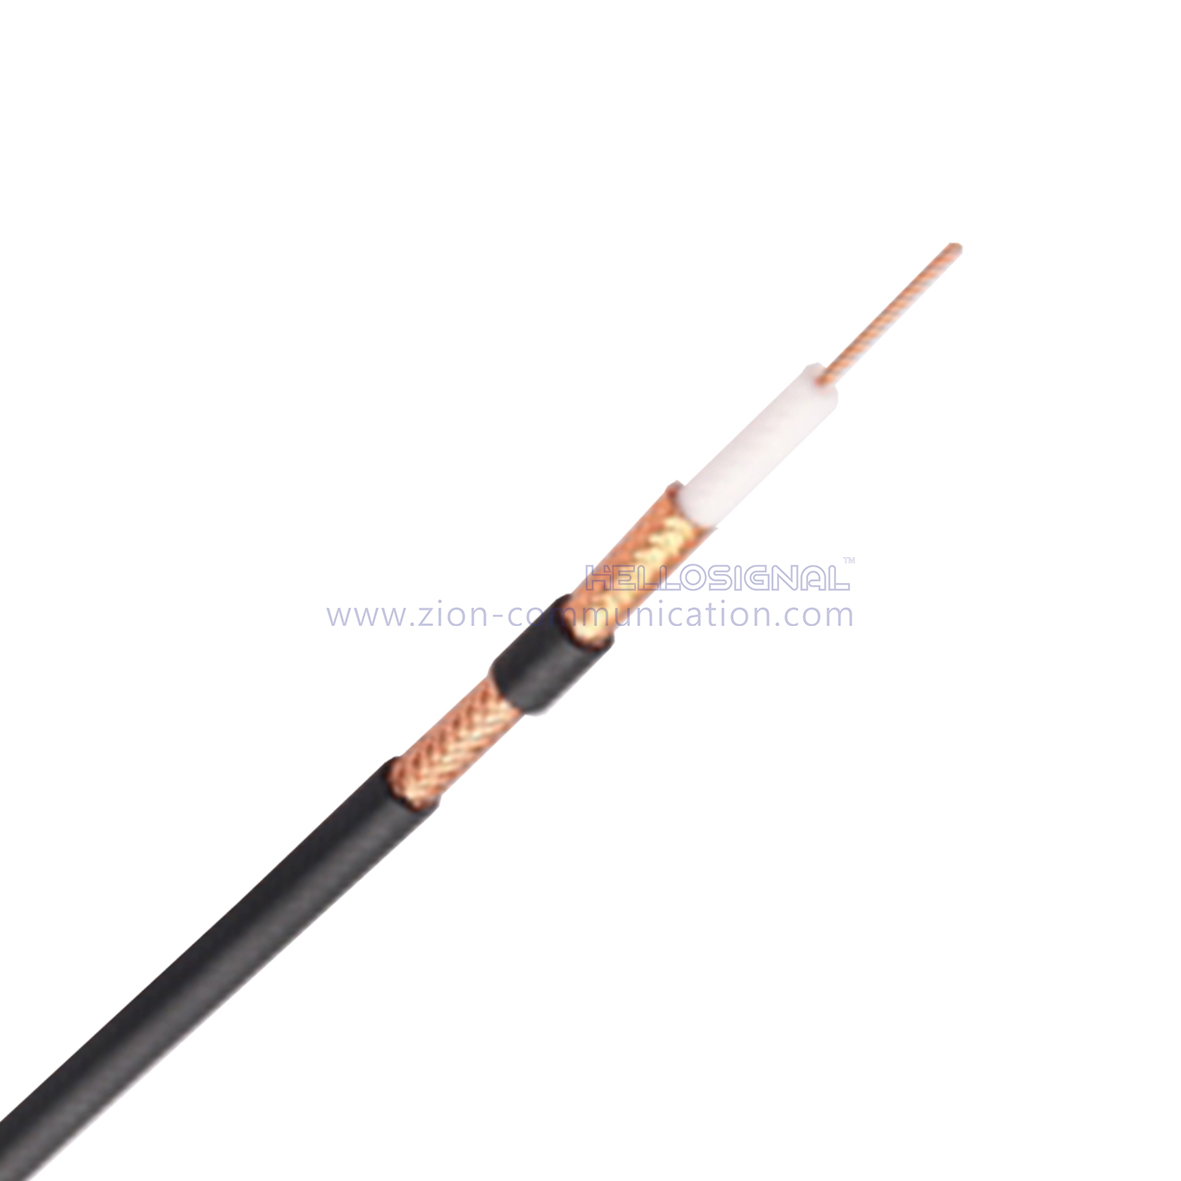 CT100 CPE Coaxial Cable